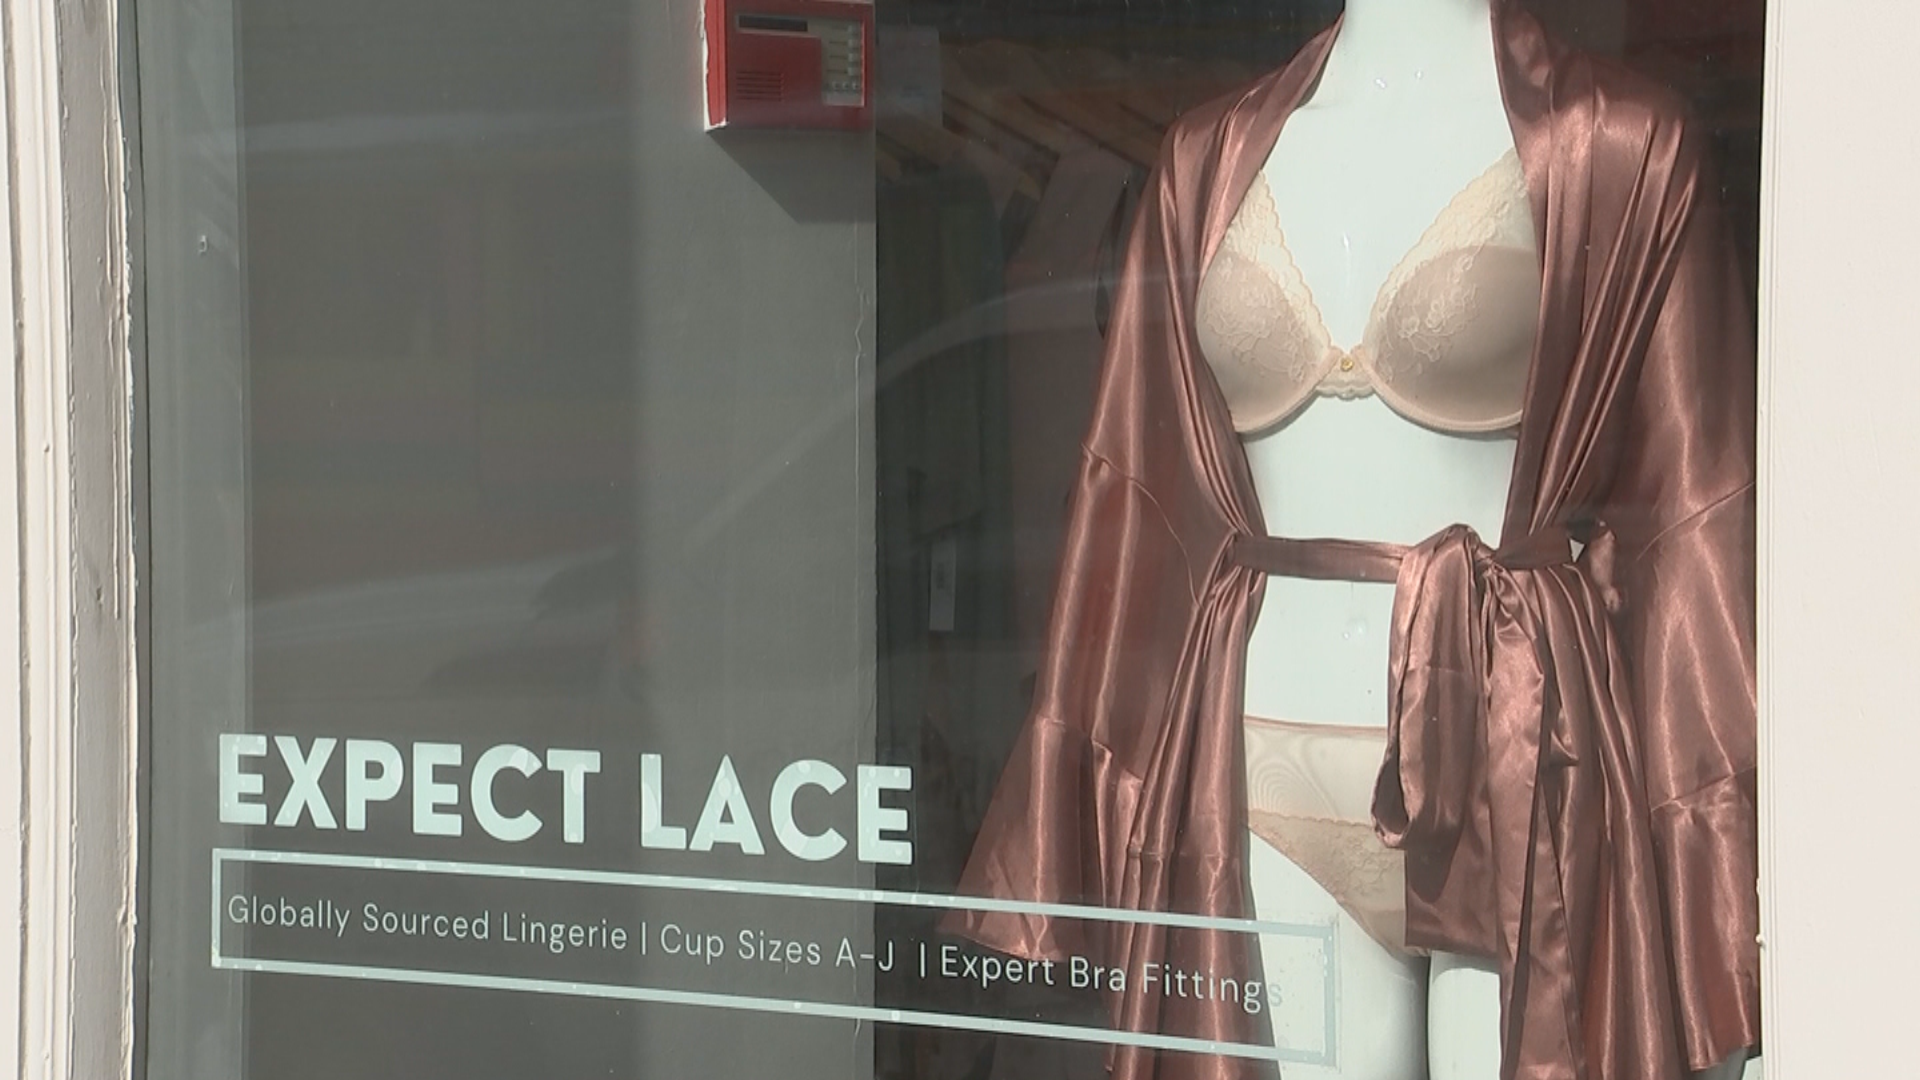 Expect Lace Manayunk Lingerie Shop Helping Women Feel Better Supported In More Ways Than